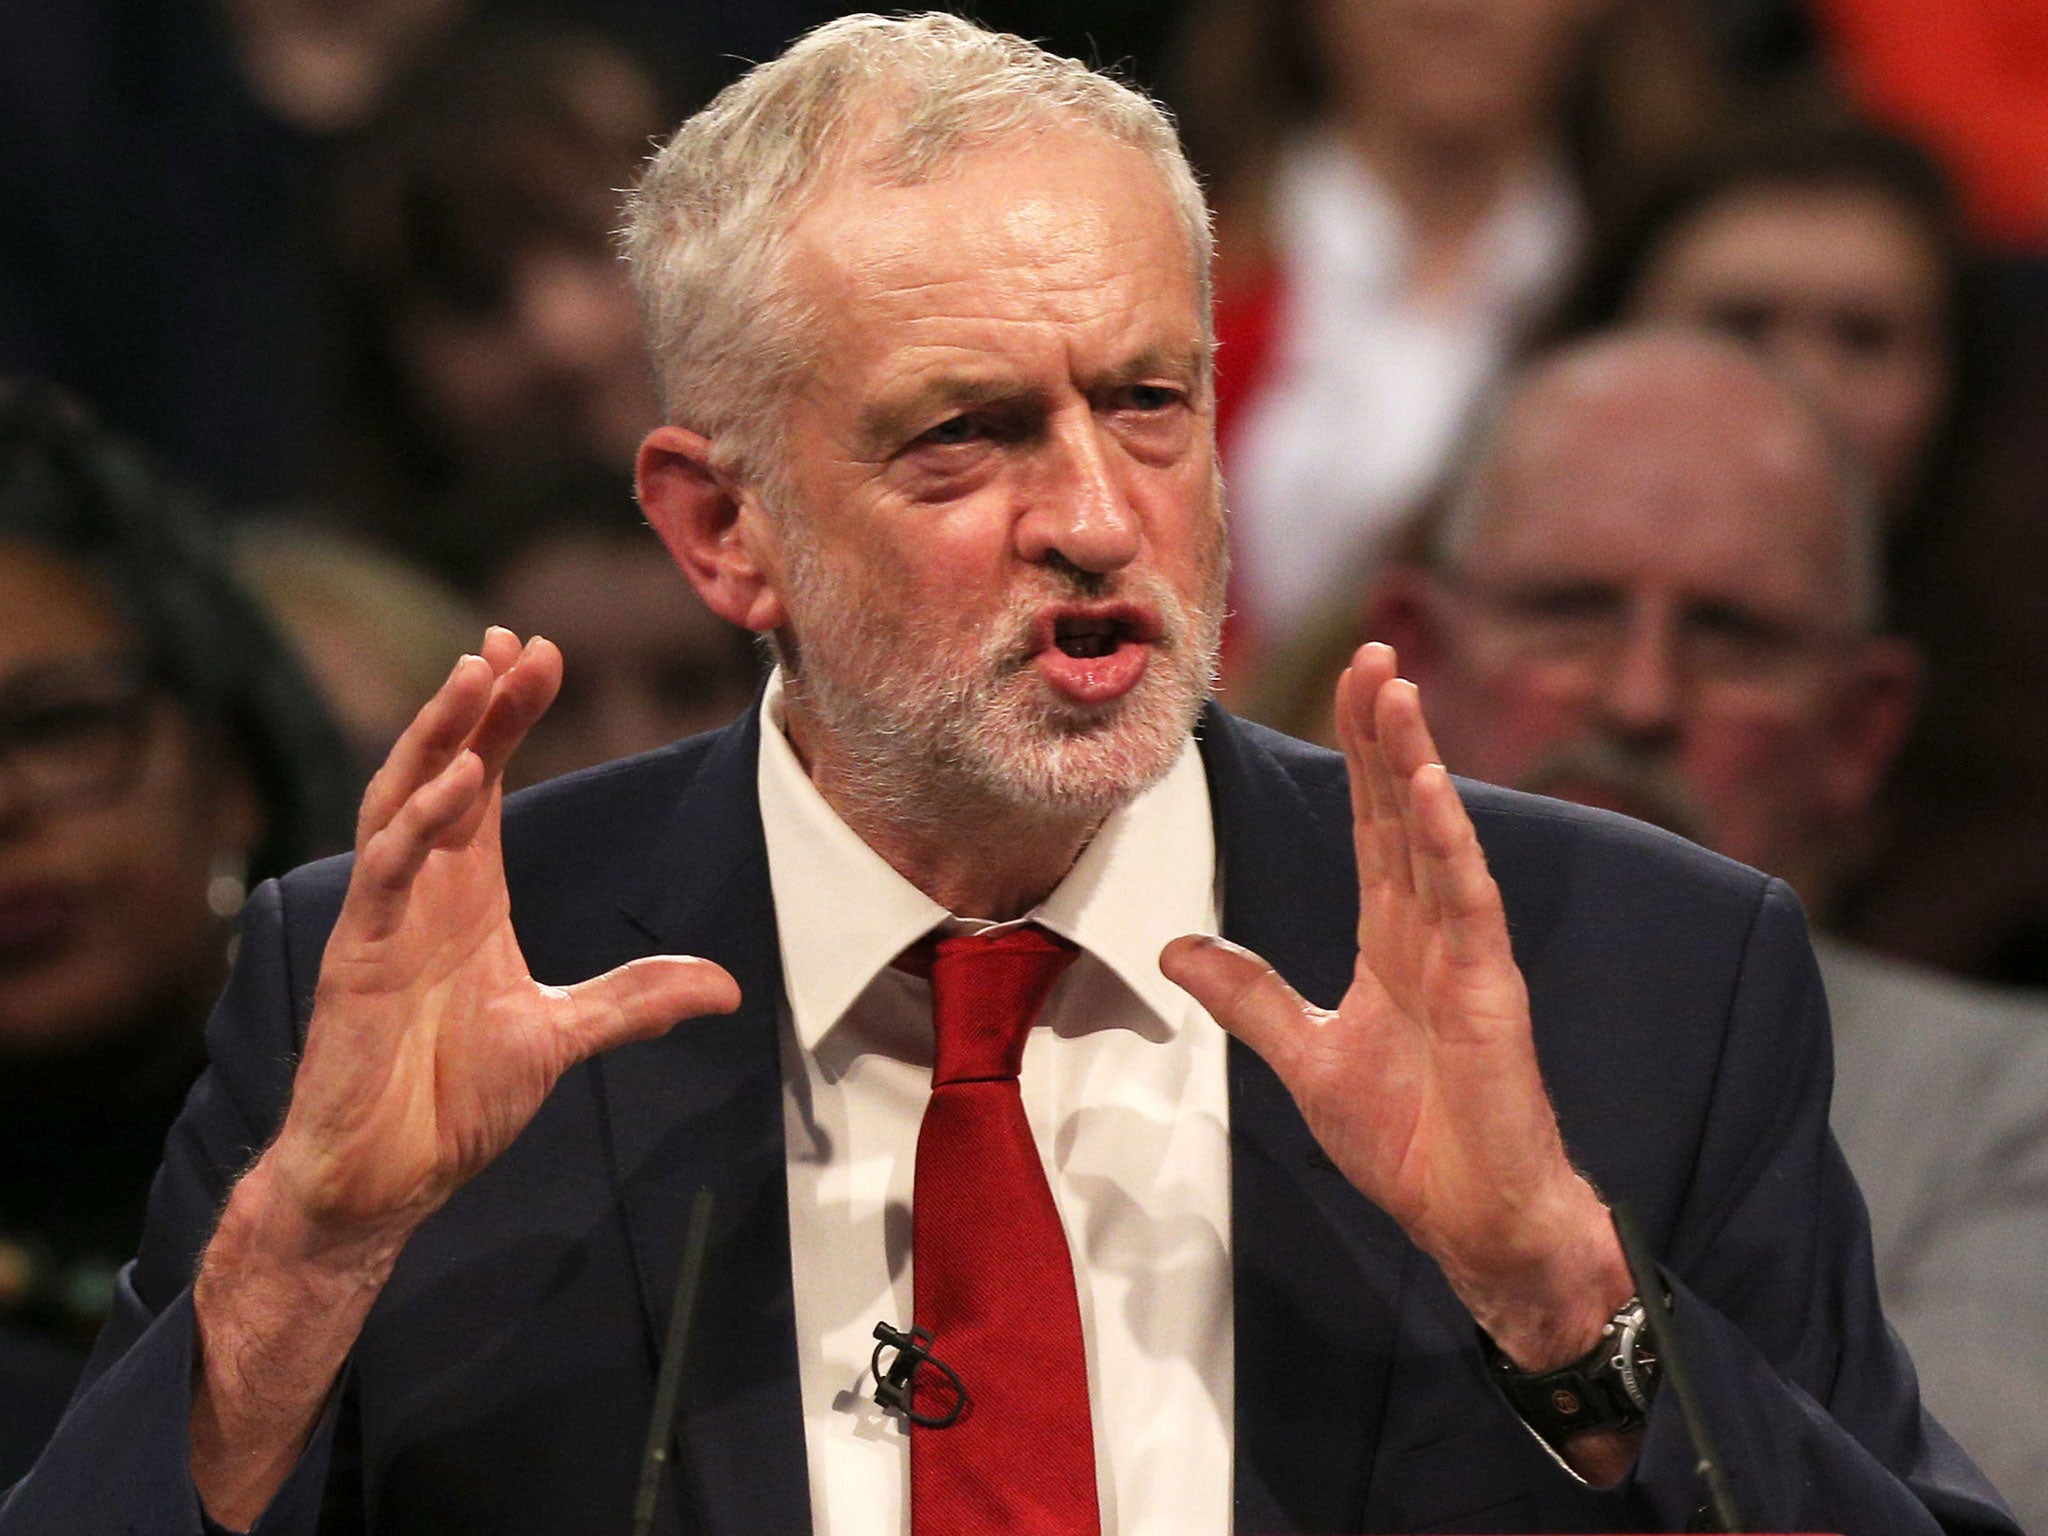 The Labour leader denied his party’s Brexit policy was confusing and ruled out a second referendum on the withdrawal deal